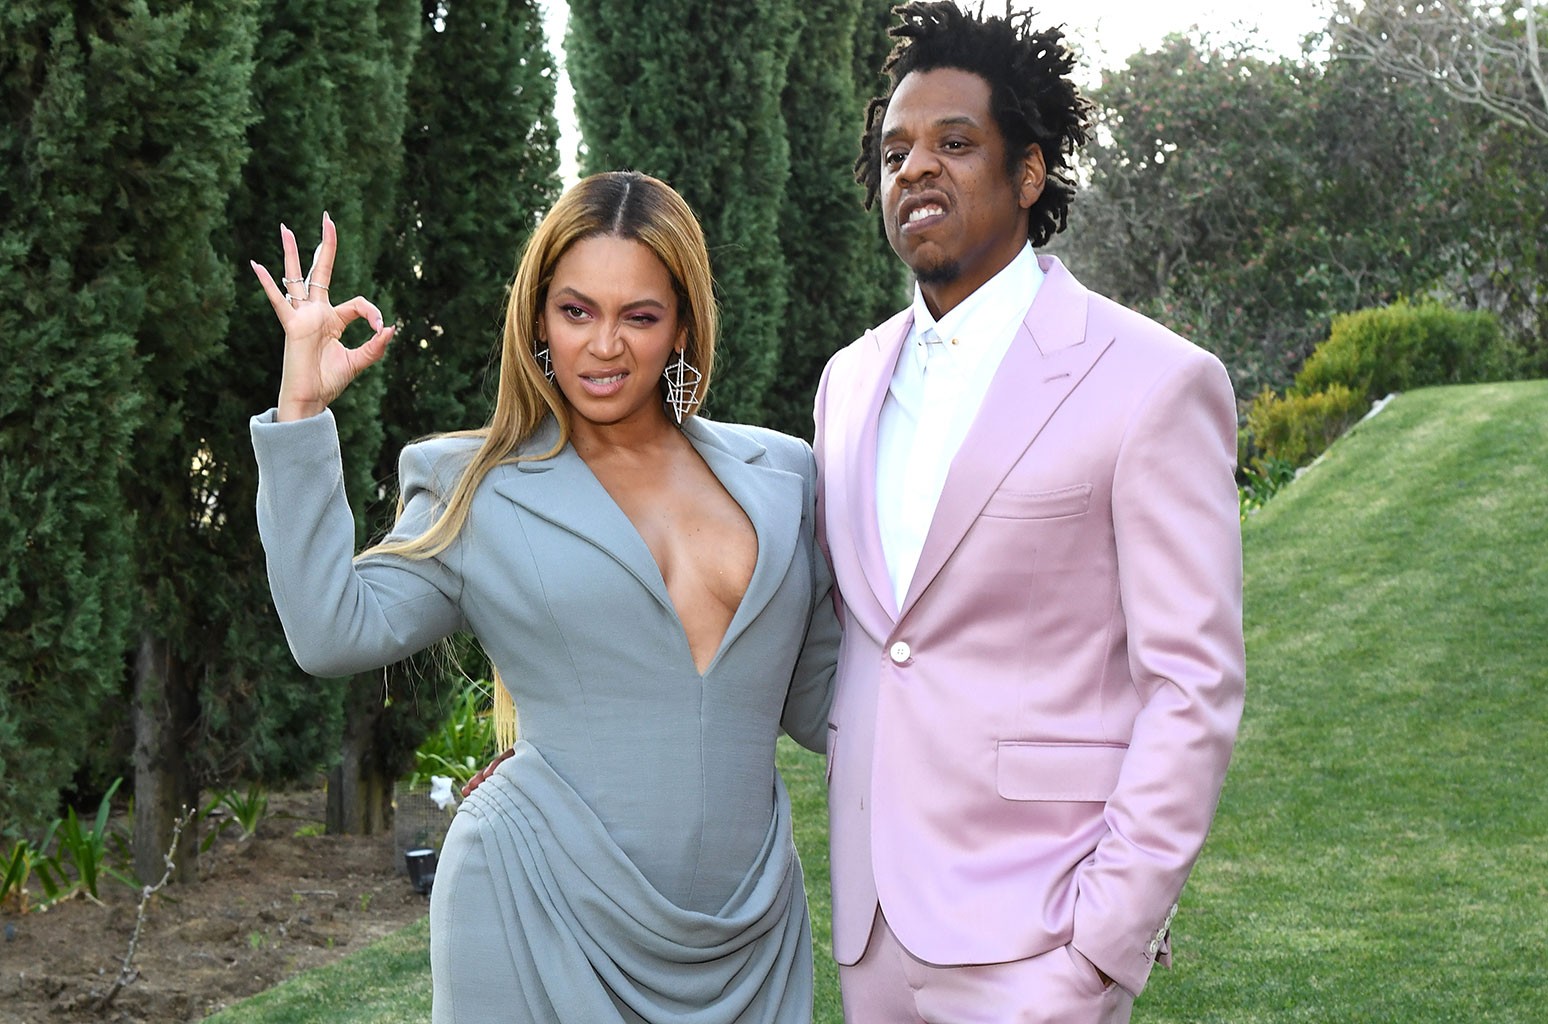 Jay-Z and Beyoncé Partner With Tiffany & Co. To Award Scholarships to HBCUs